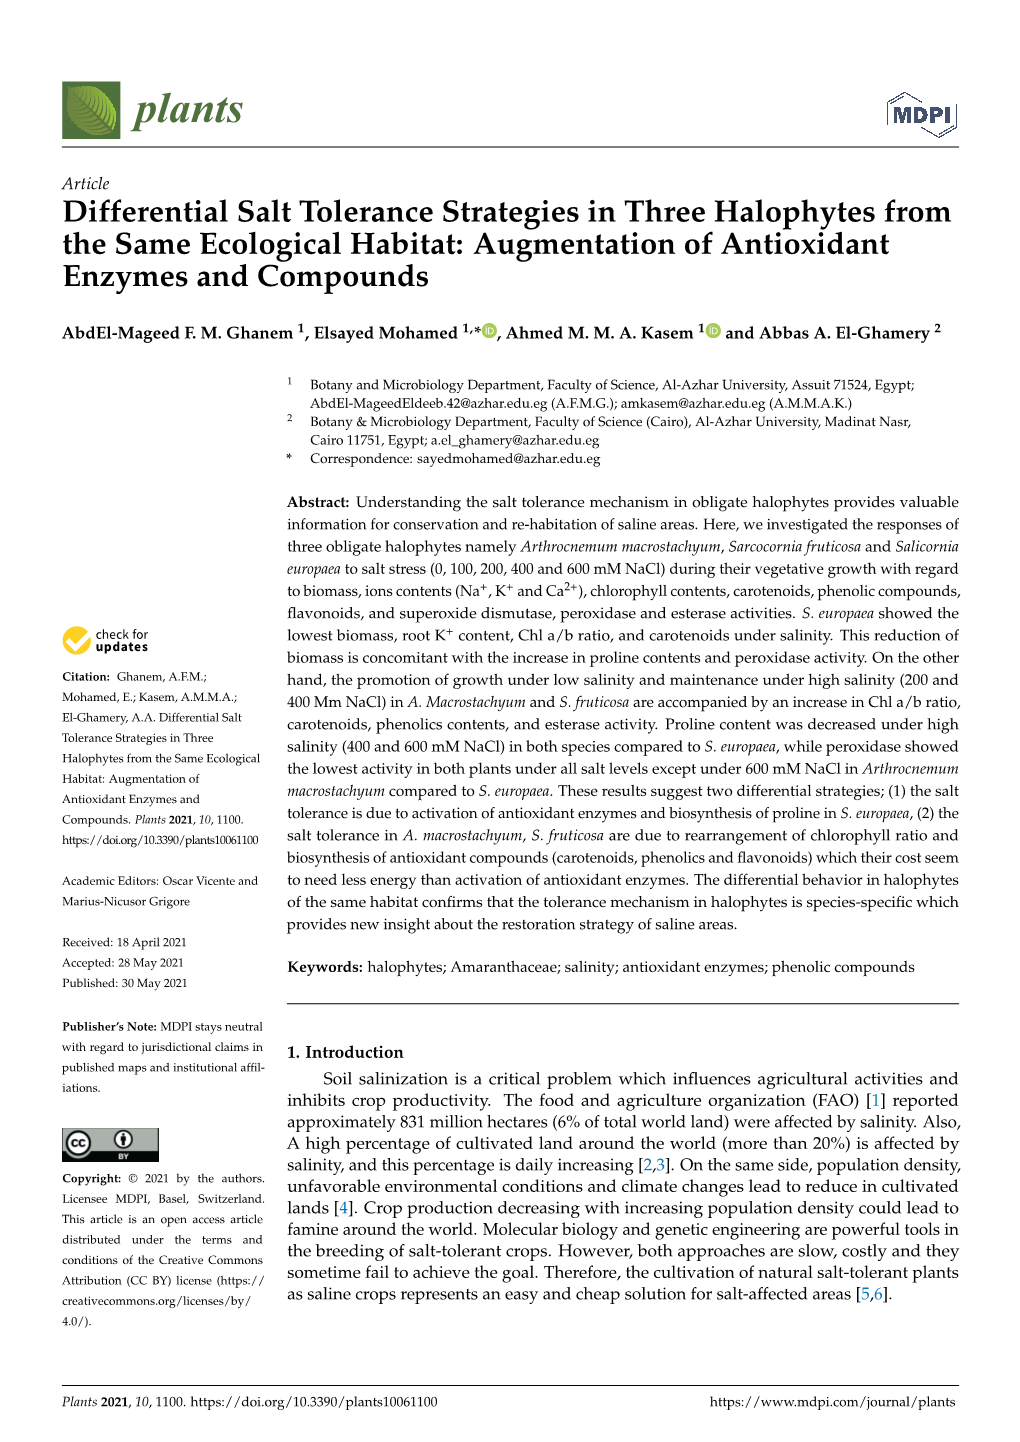 Differential Salt Tolerance Strategies in Three Halophytes from the Same Ecological Habitat: Augmentation of Antioxidant Enzymes and Compounds